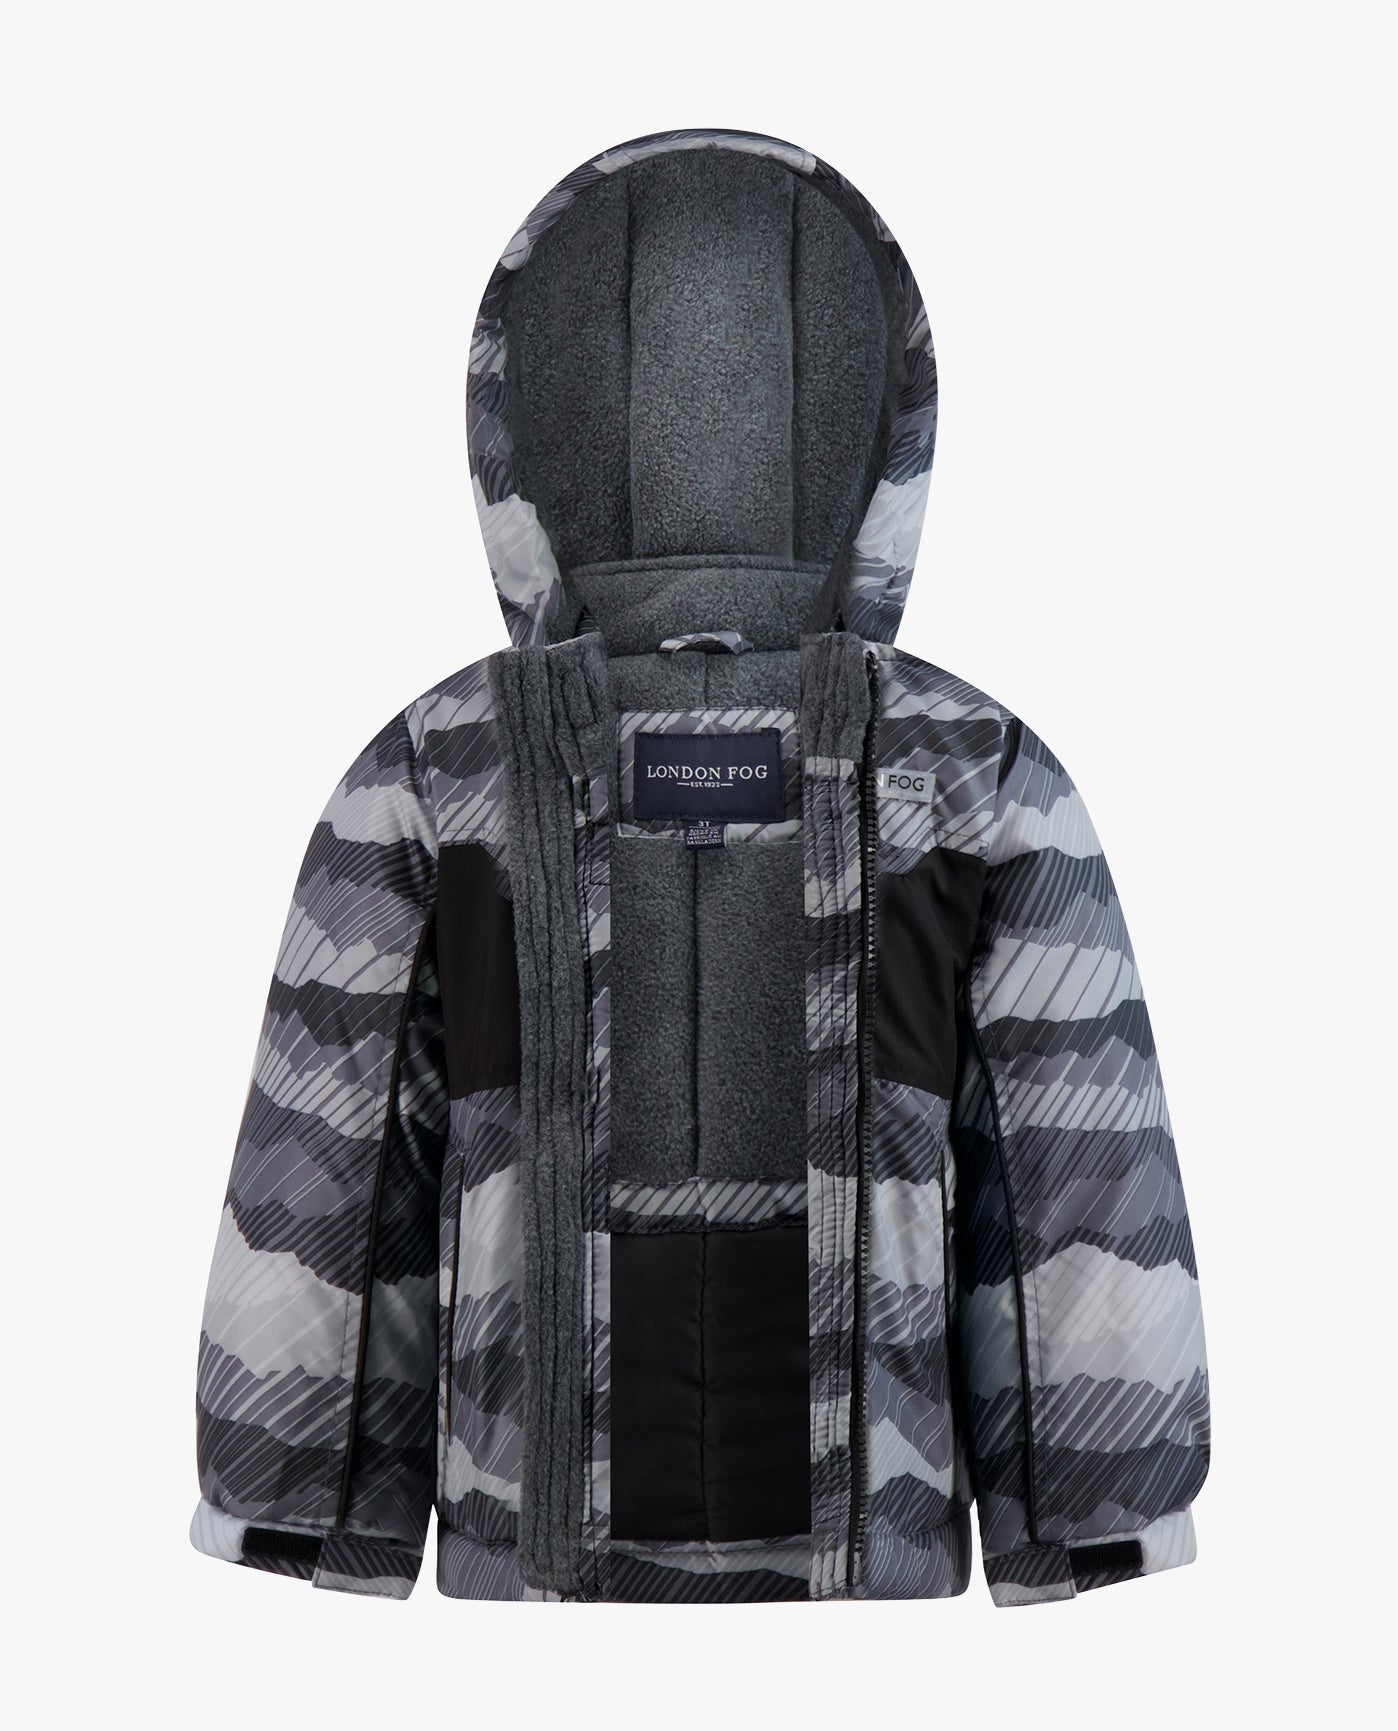 OPEN VIEW OF BOYS ZIP-FRONT HOODED JACKET WITH OVERALL SNOW PANT | GREY PRINT